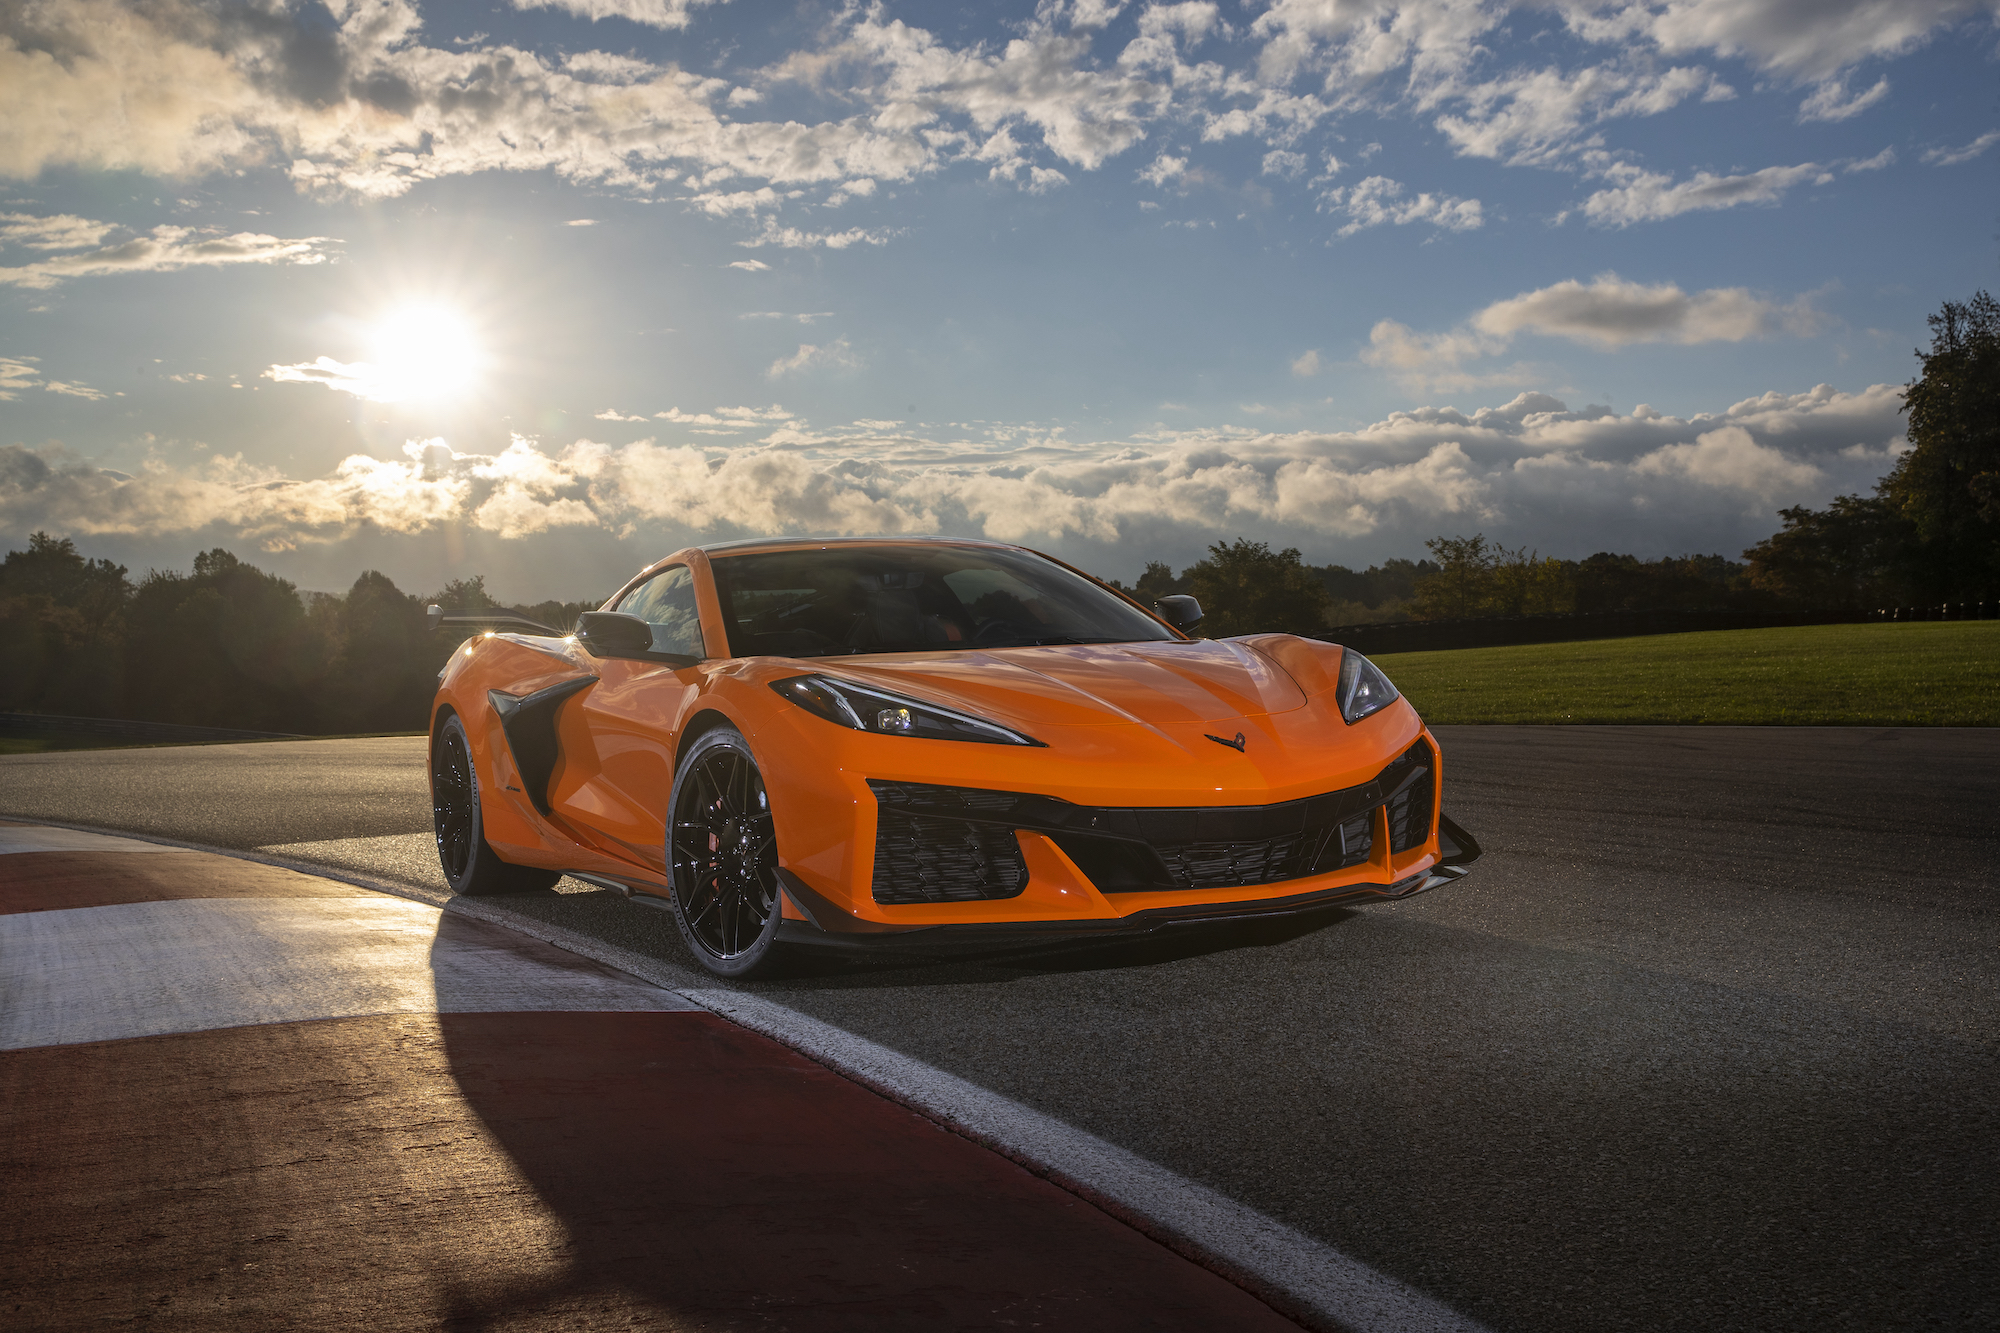 Behind the wheel of the most technically advanced Corvette on the market